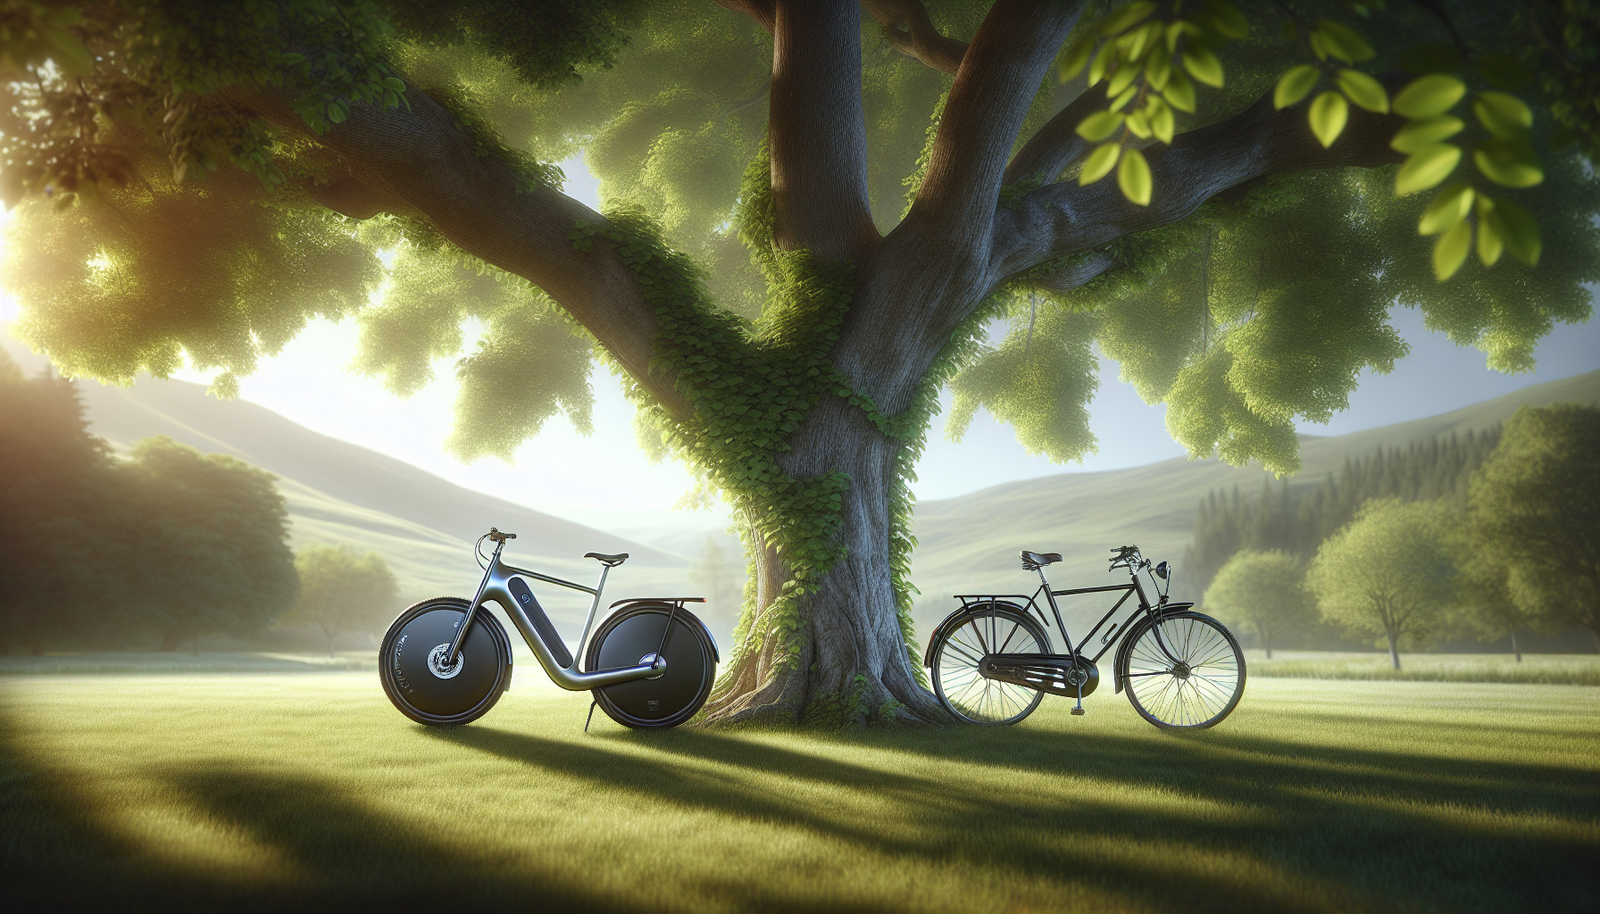 What Is The Impact Of Electric Bikes On The Environment Compared To Traditional Bikes?